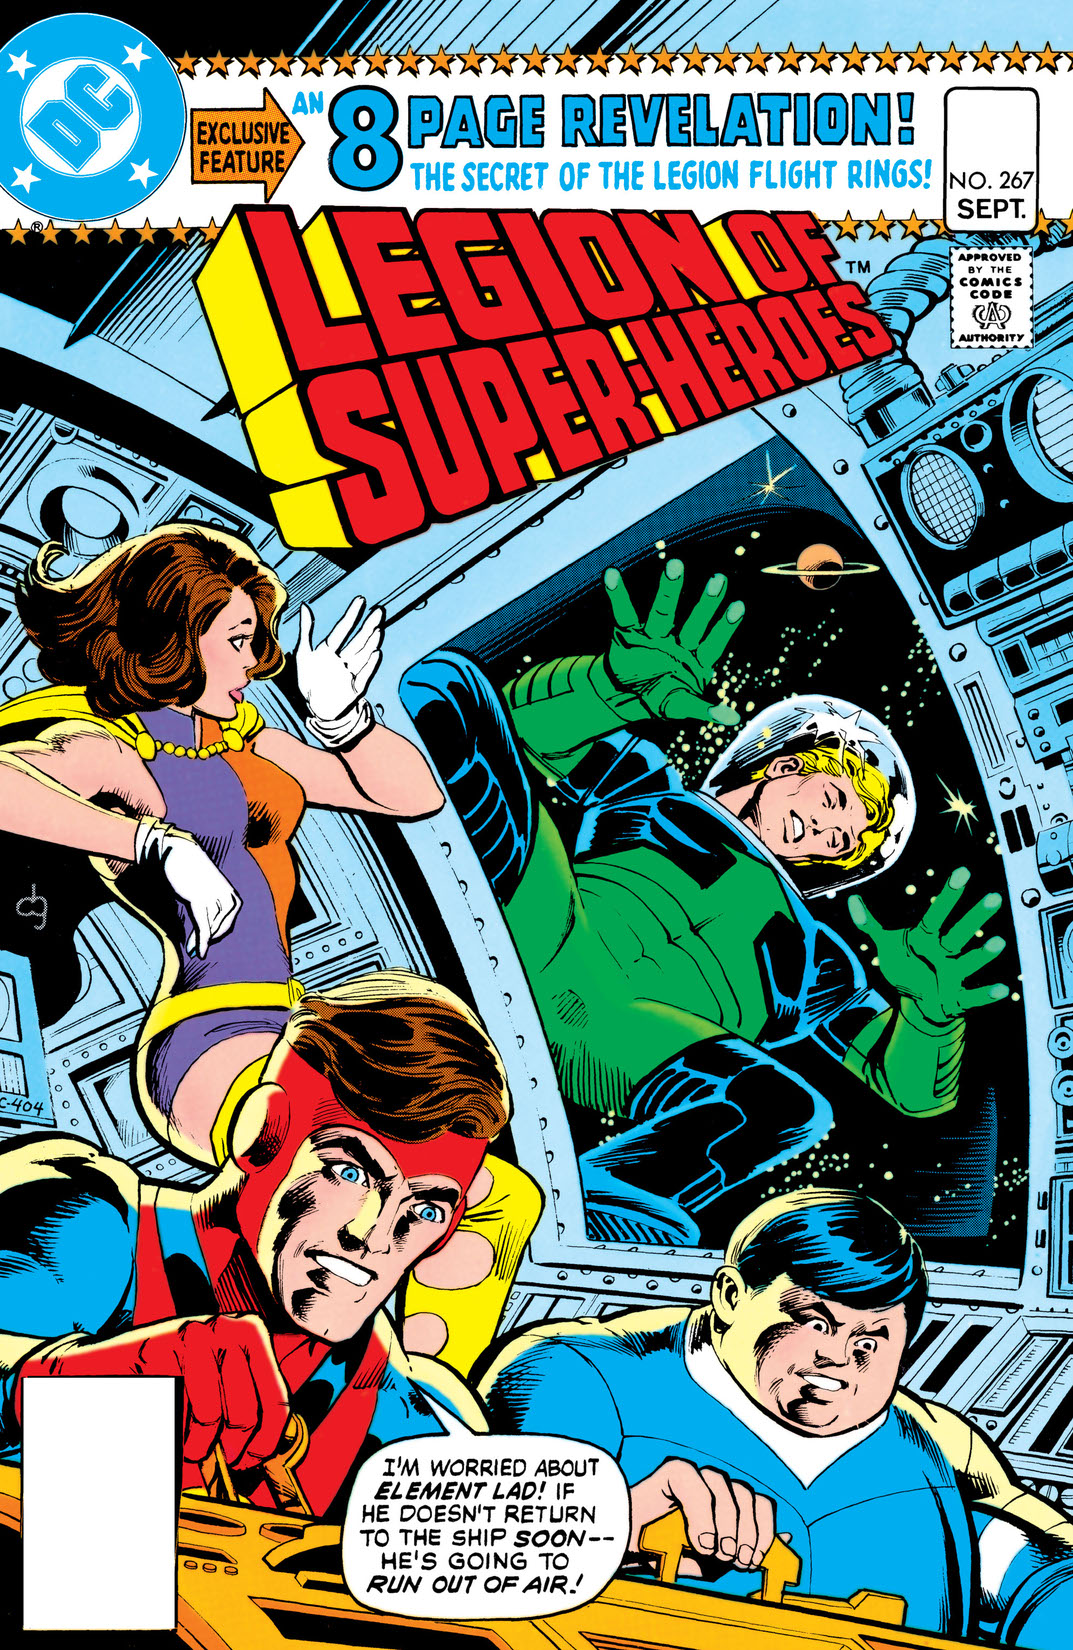 The Legion of Super-Heroes (1980-) #267 preview images